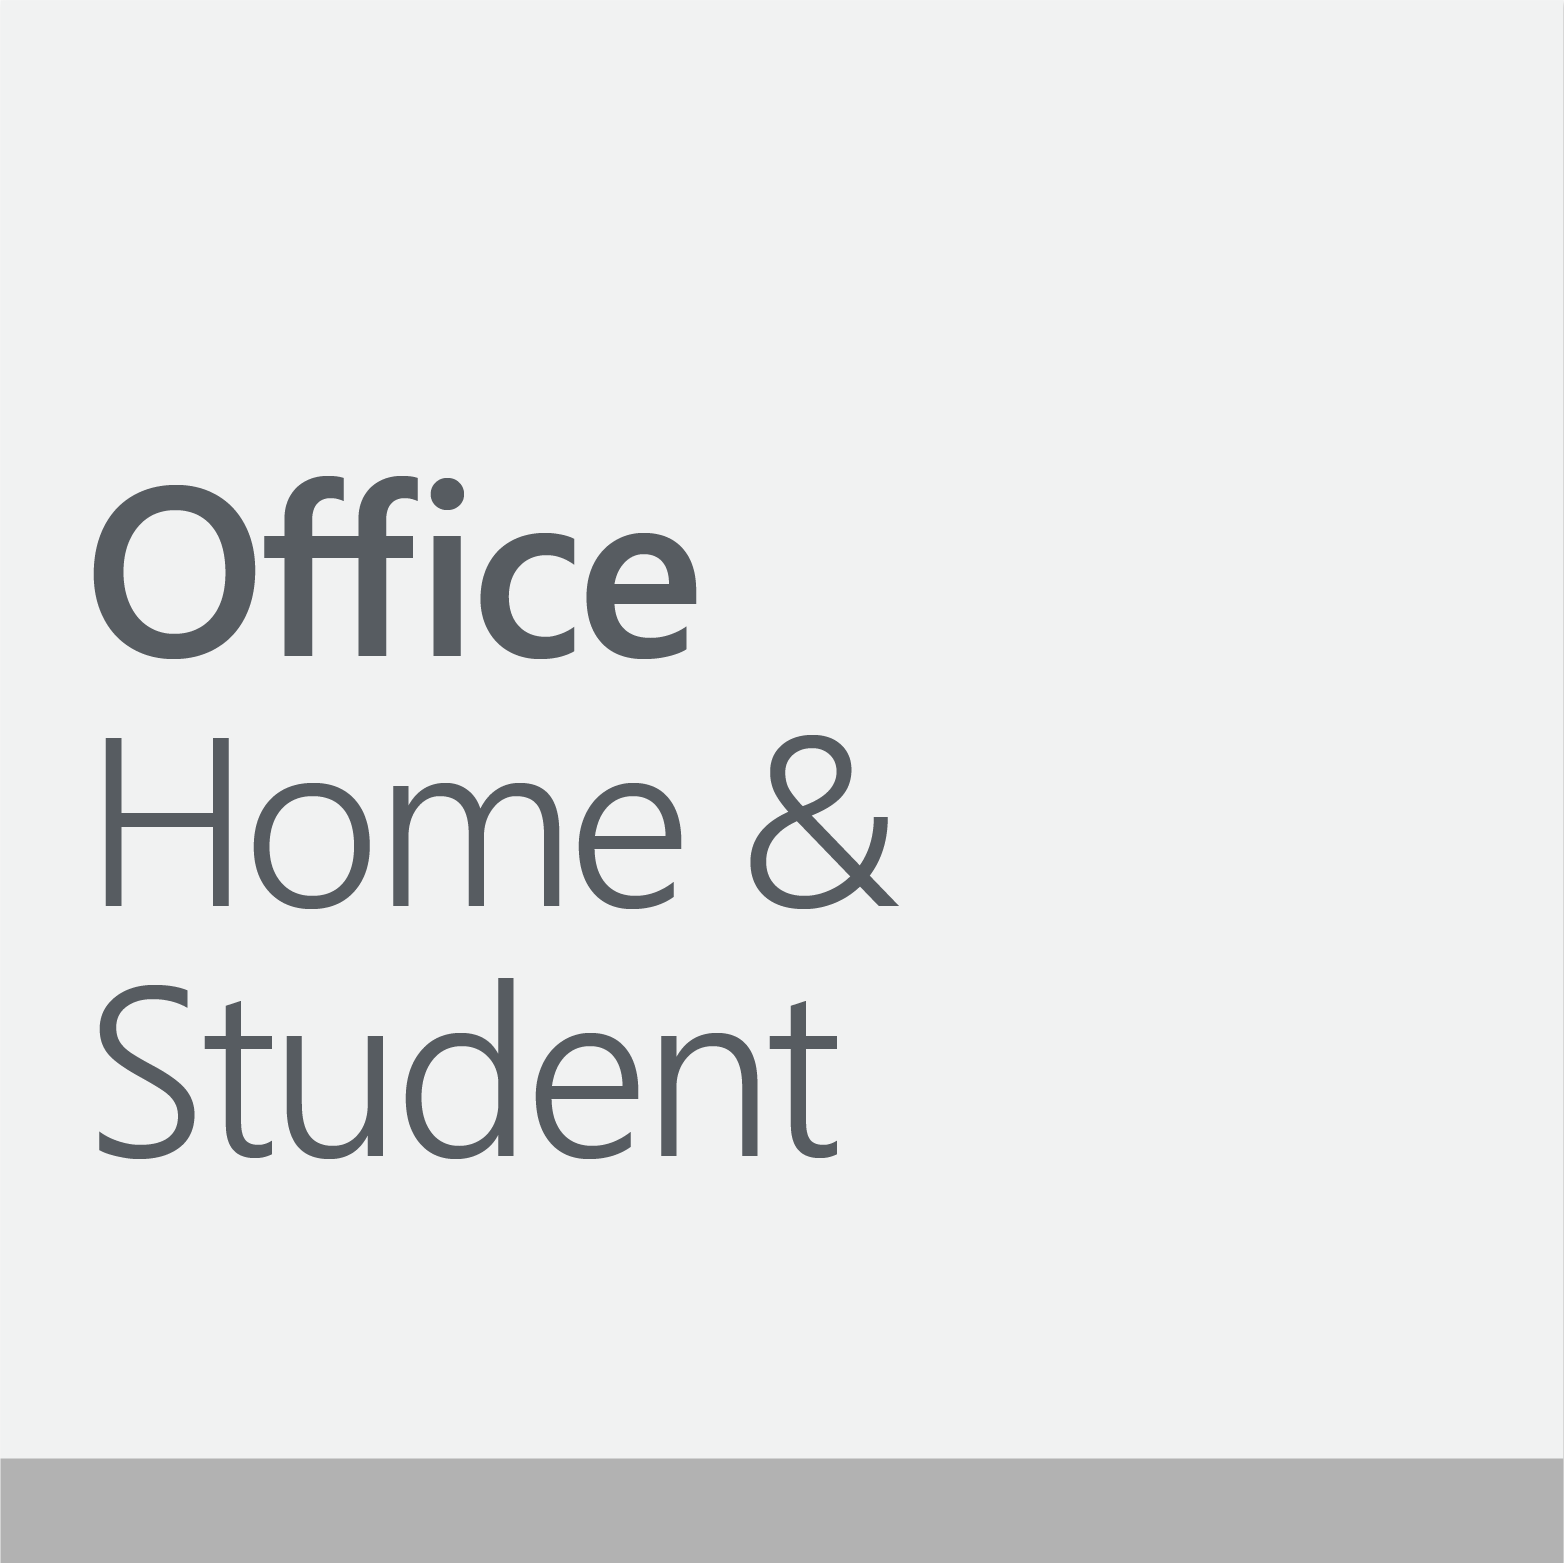 Office Home ＆ Student 2019 for Mac Microsoft　BTO パソコン　格安通販